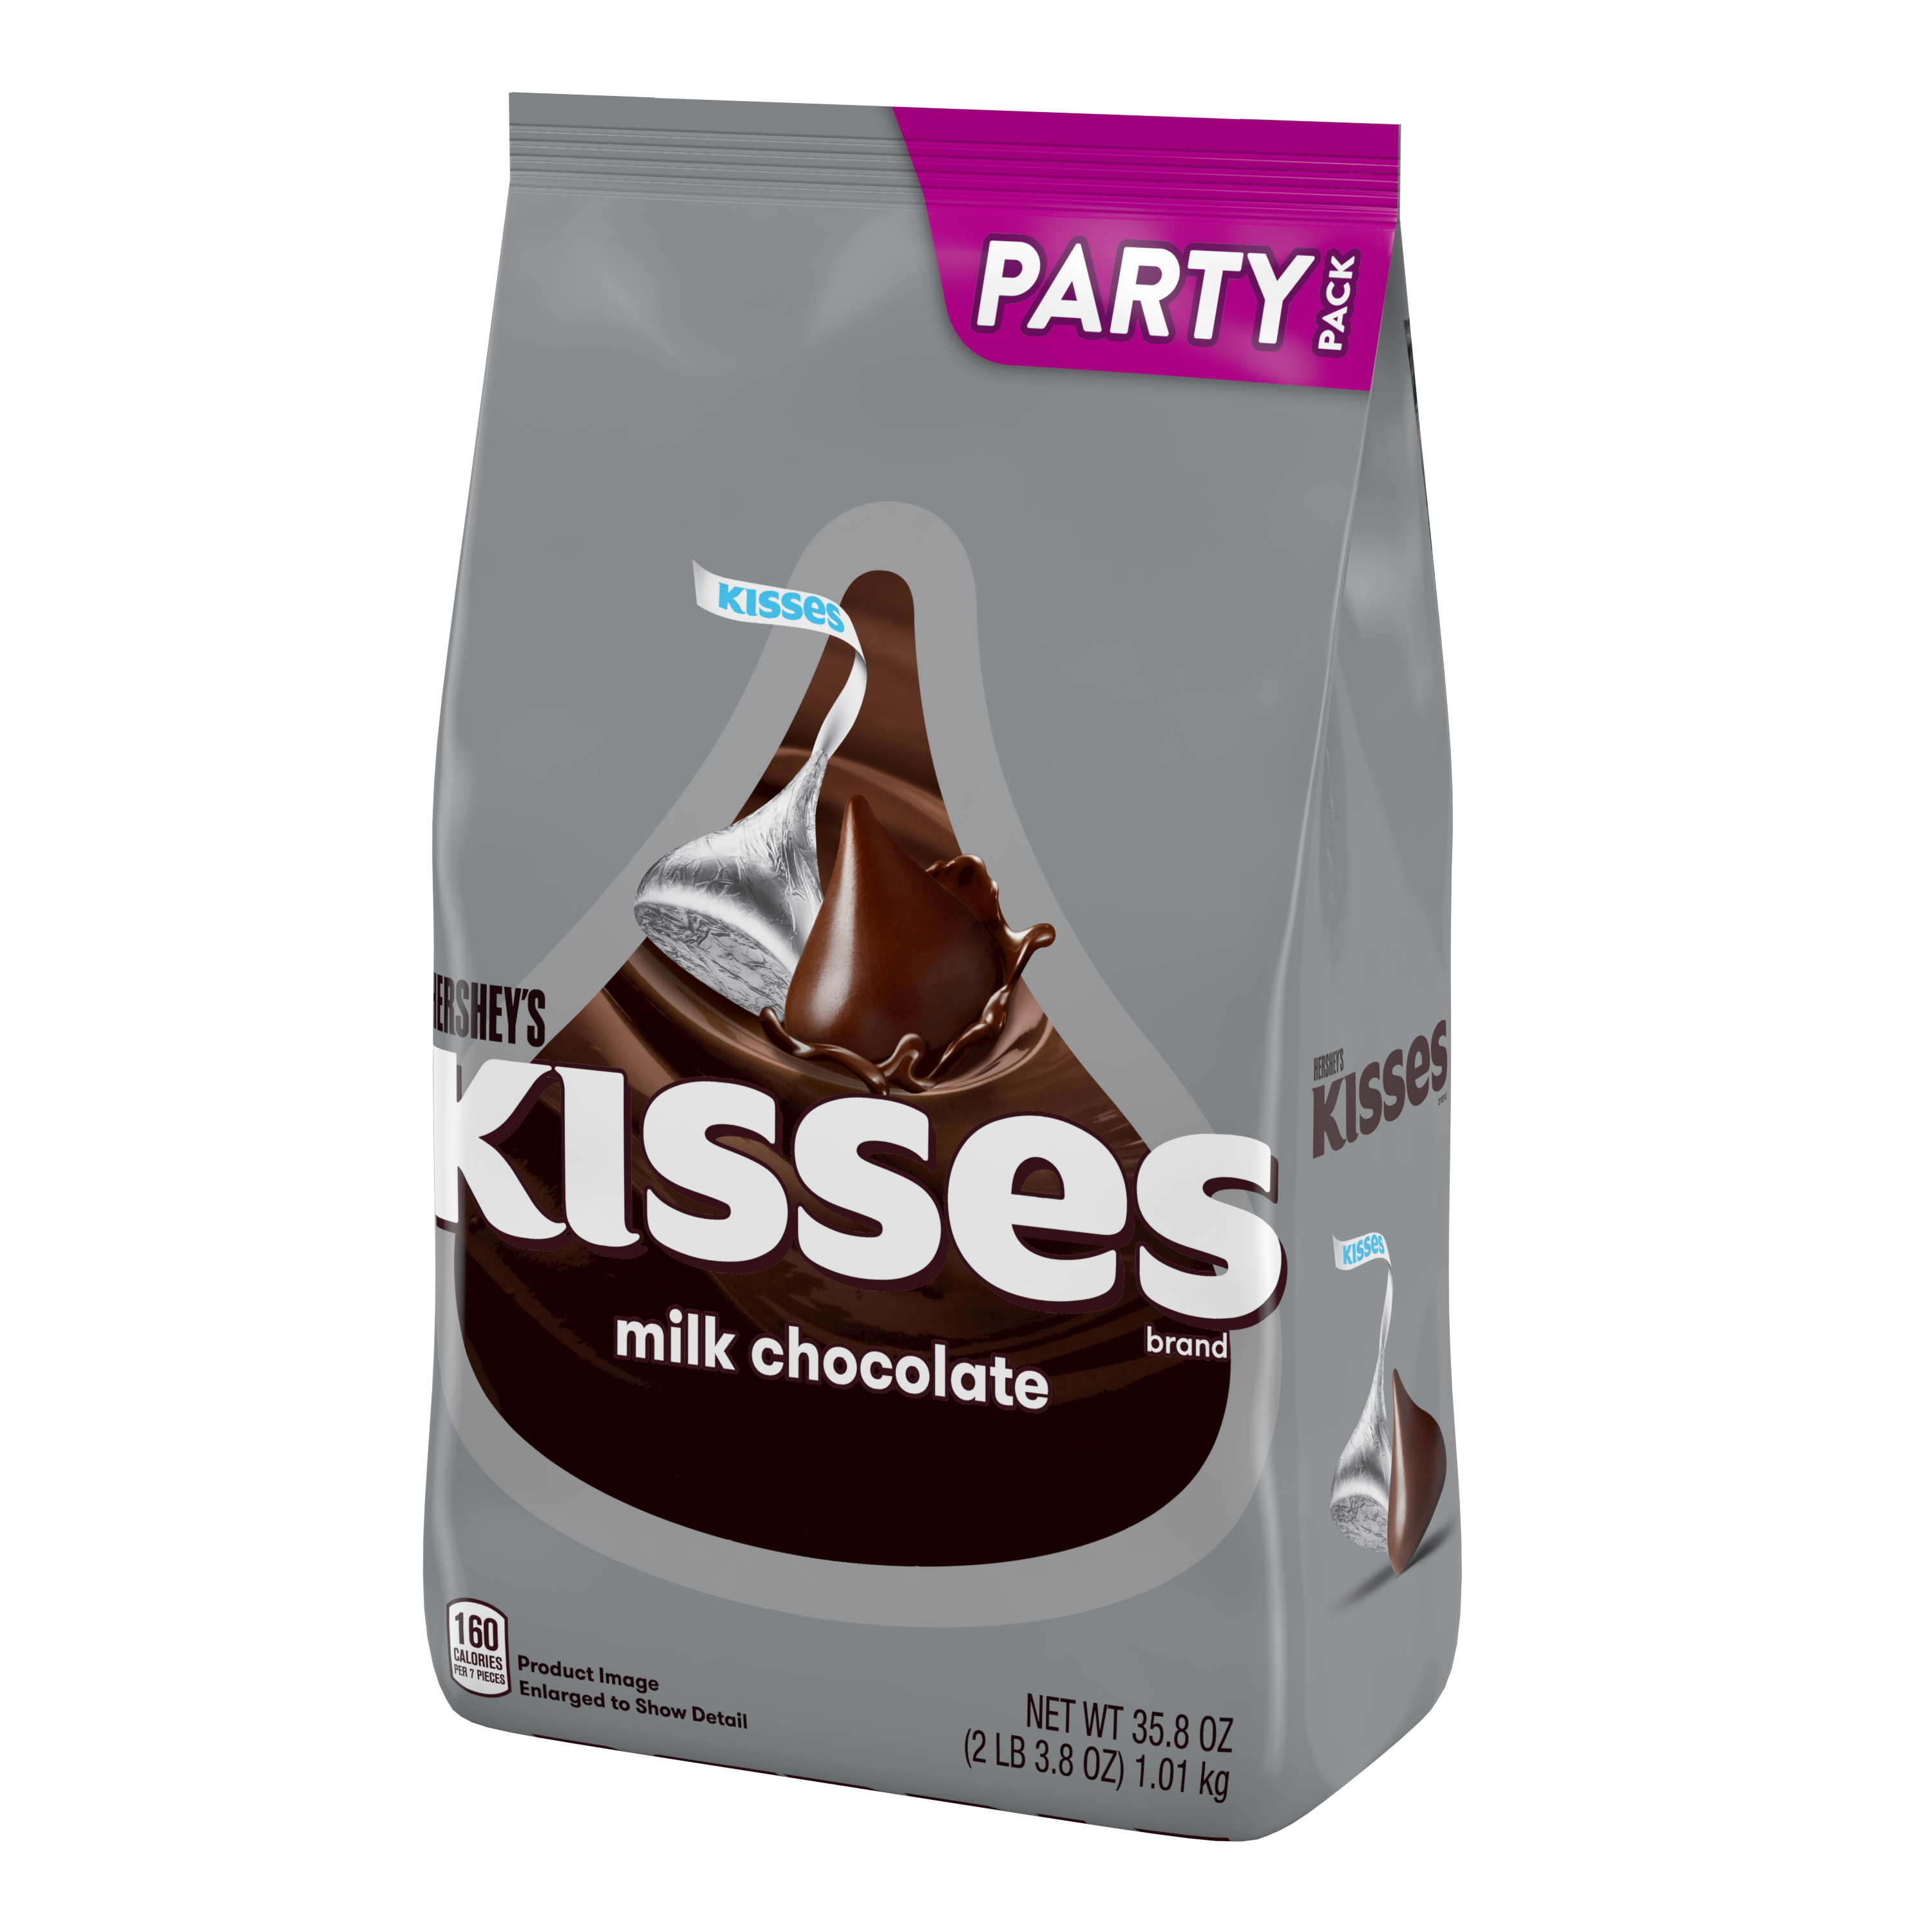 HERSHEY'S KISSES Milk Chocolate Candy, 35.8 oz pack - Right Side of Package